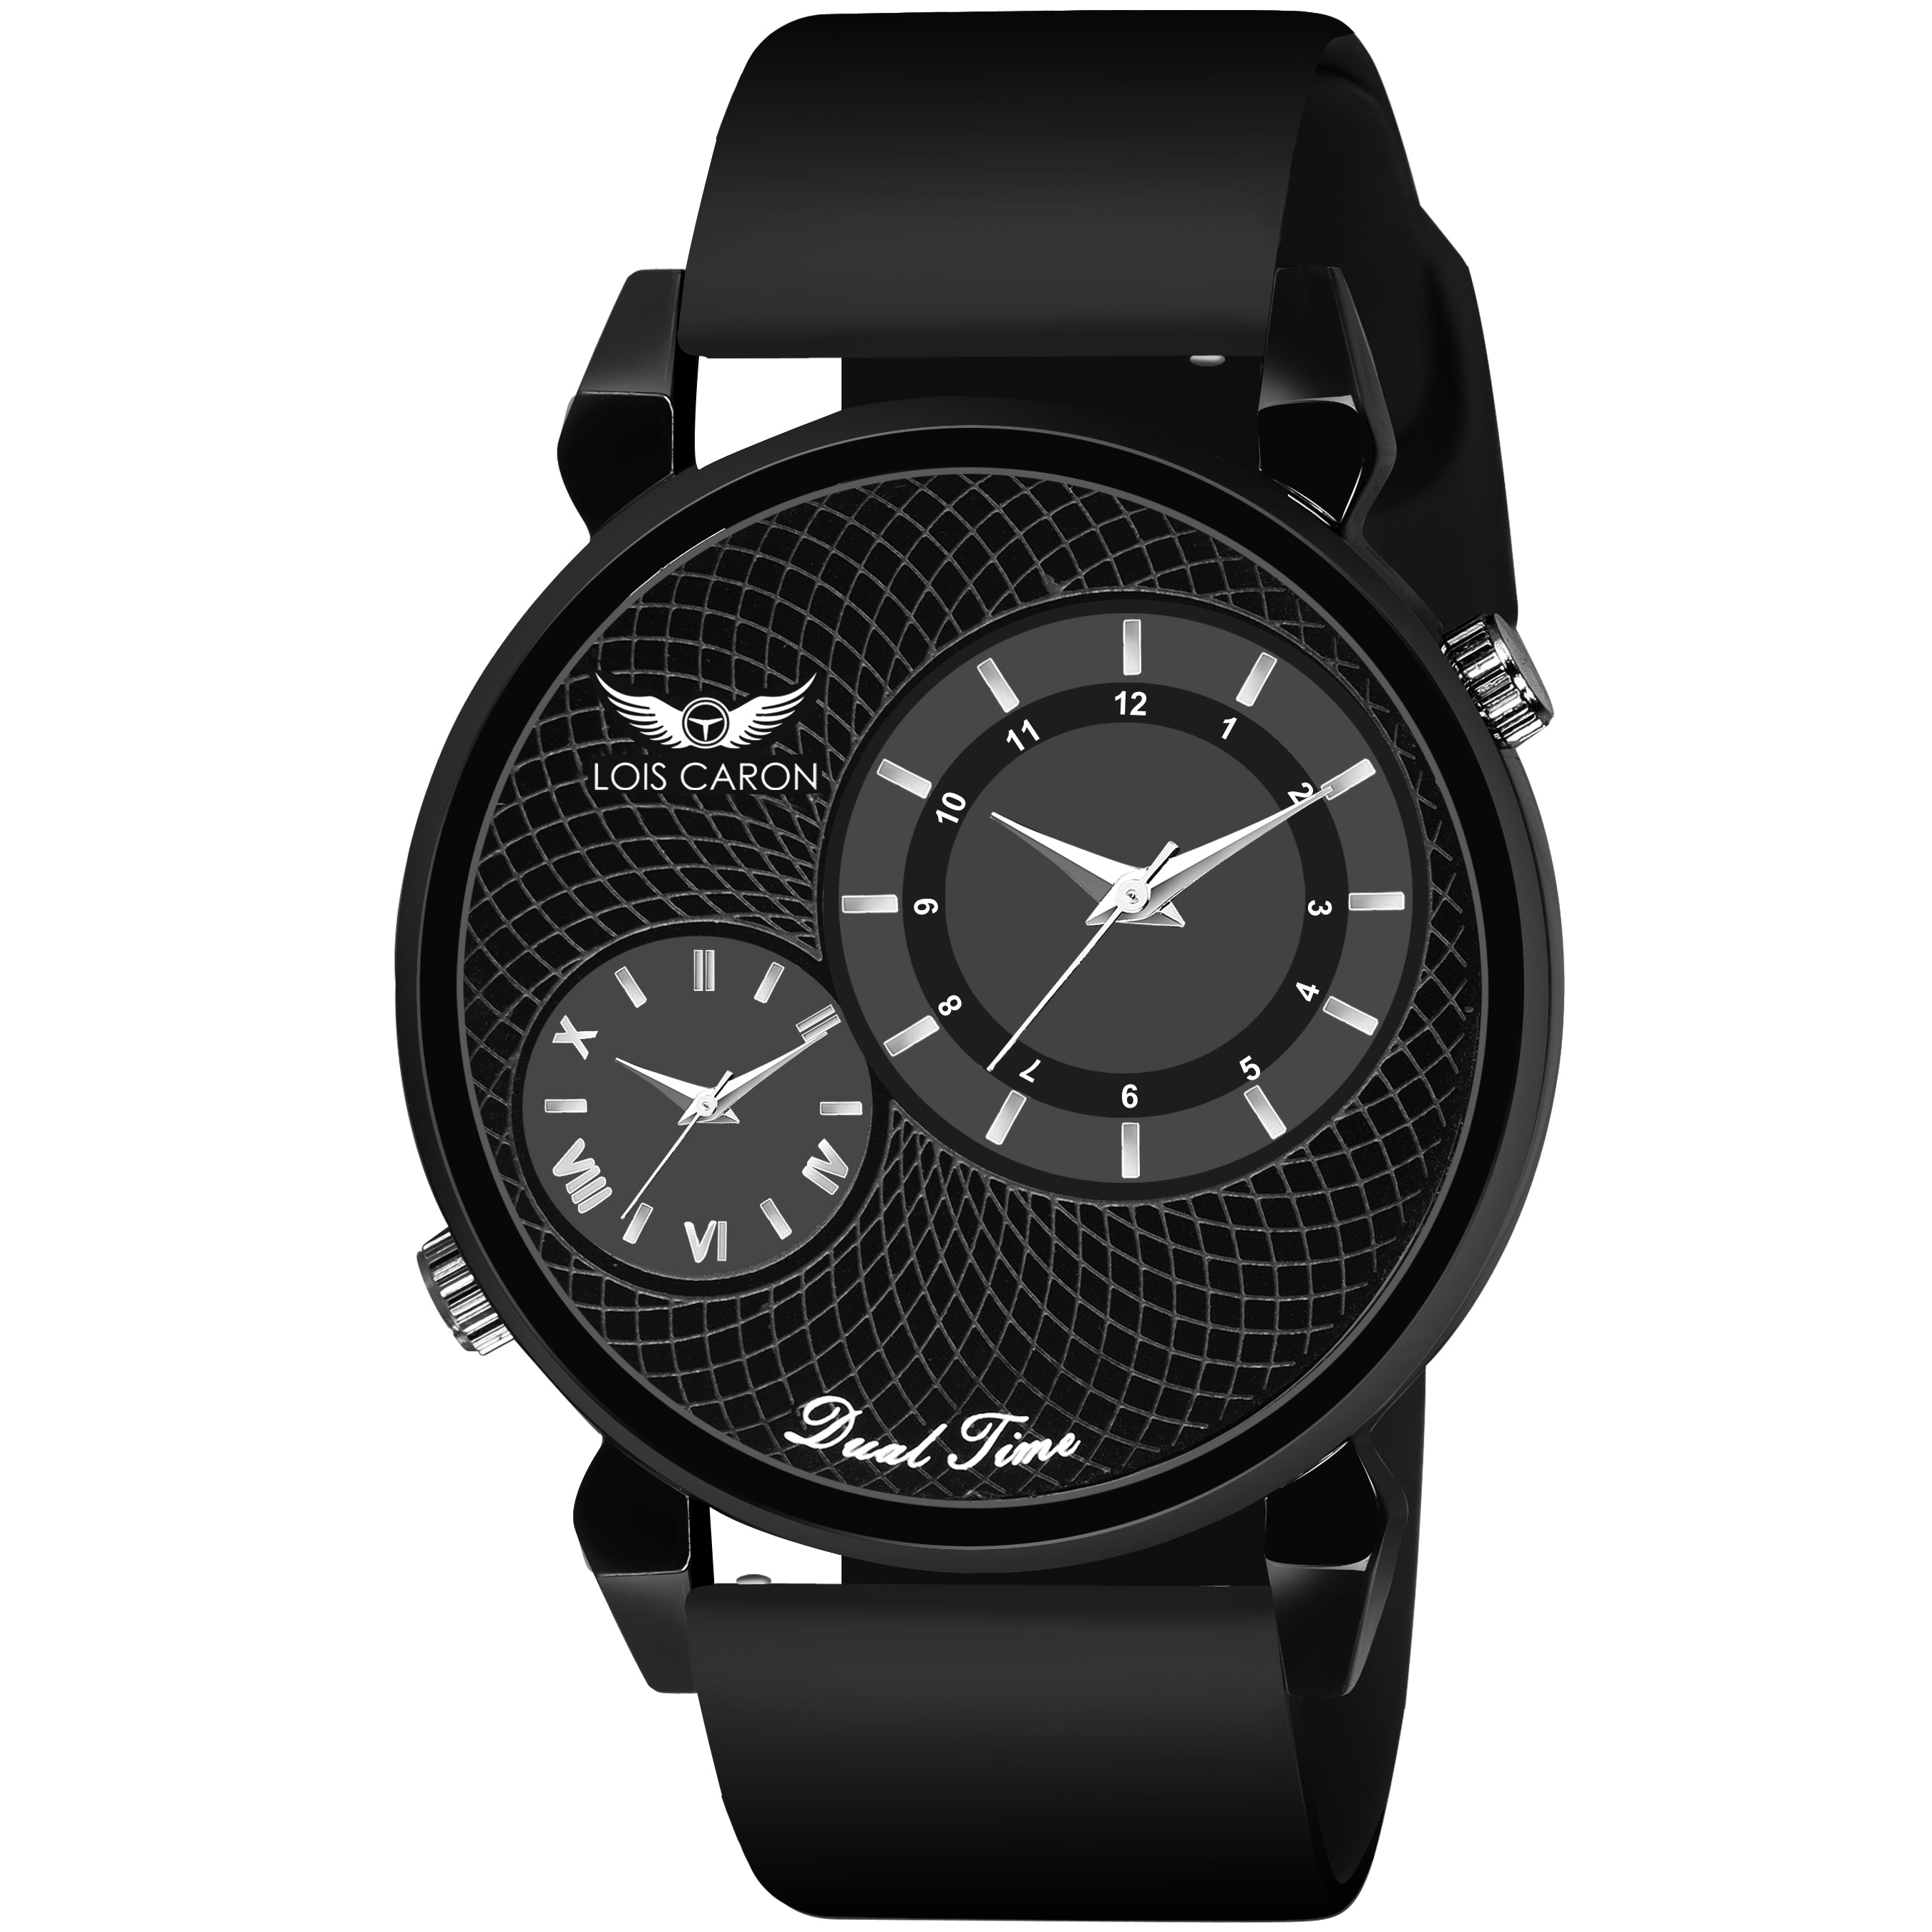 LOIS CARON  Dual Time with Slim Case and High Quality Silicon Strap Boys Analog Watch - For Men LCS-8812